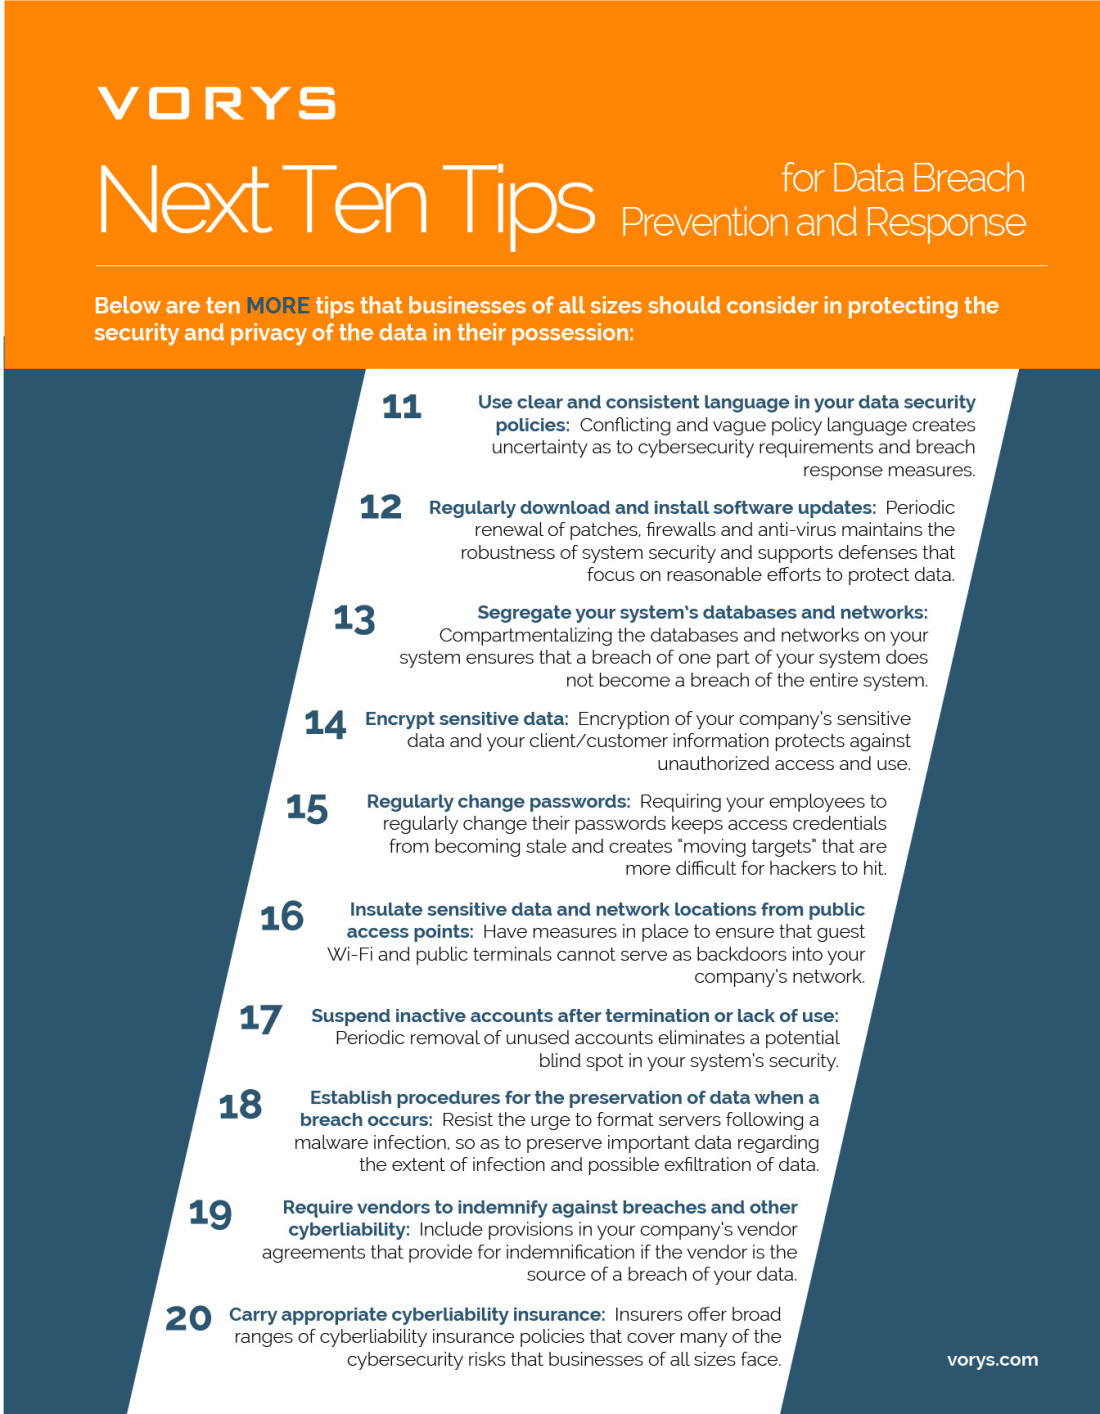 Next Ten Cybersecurity Tips for Data Breach Prevention and Response